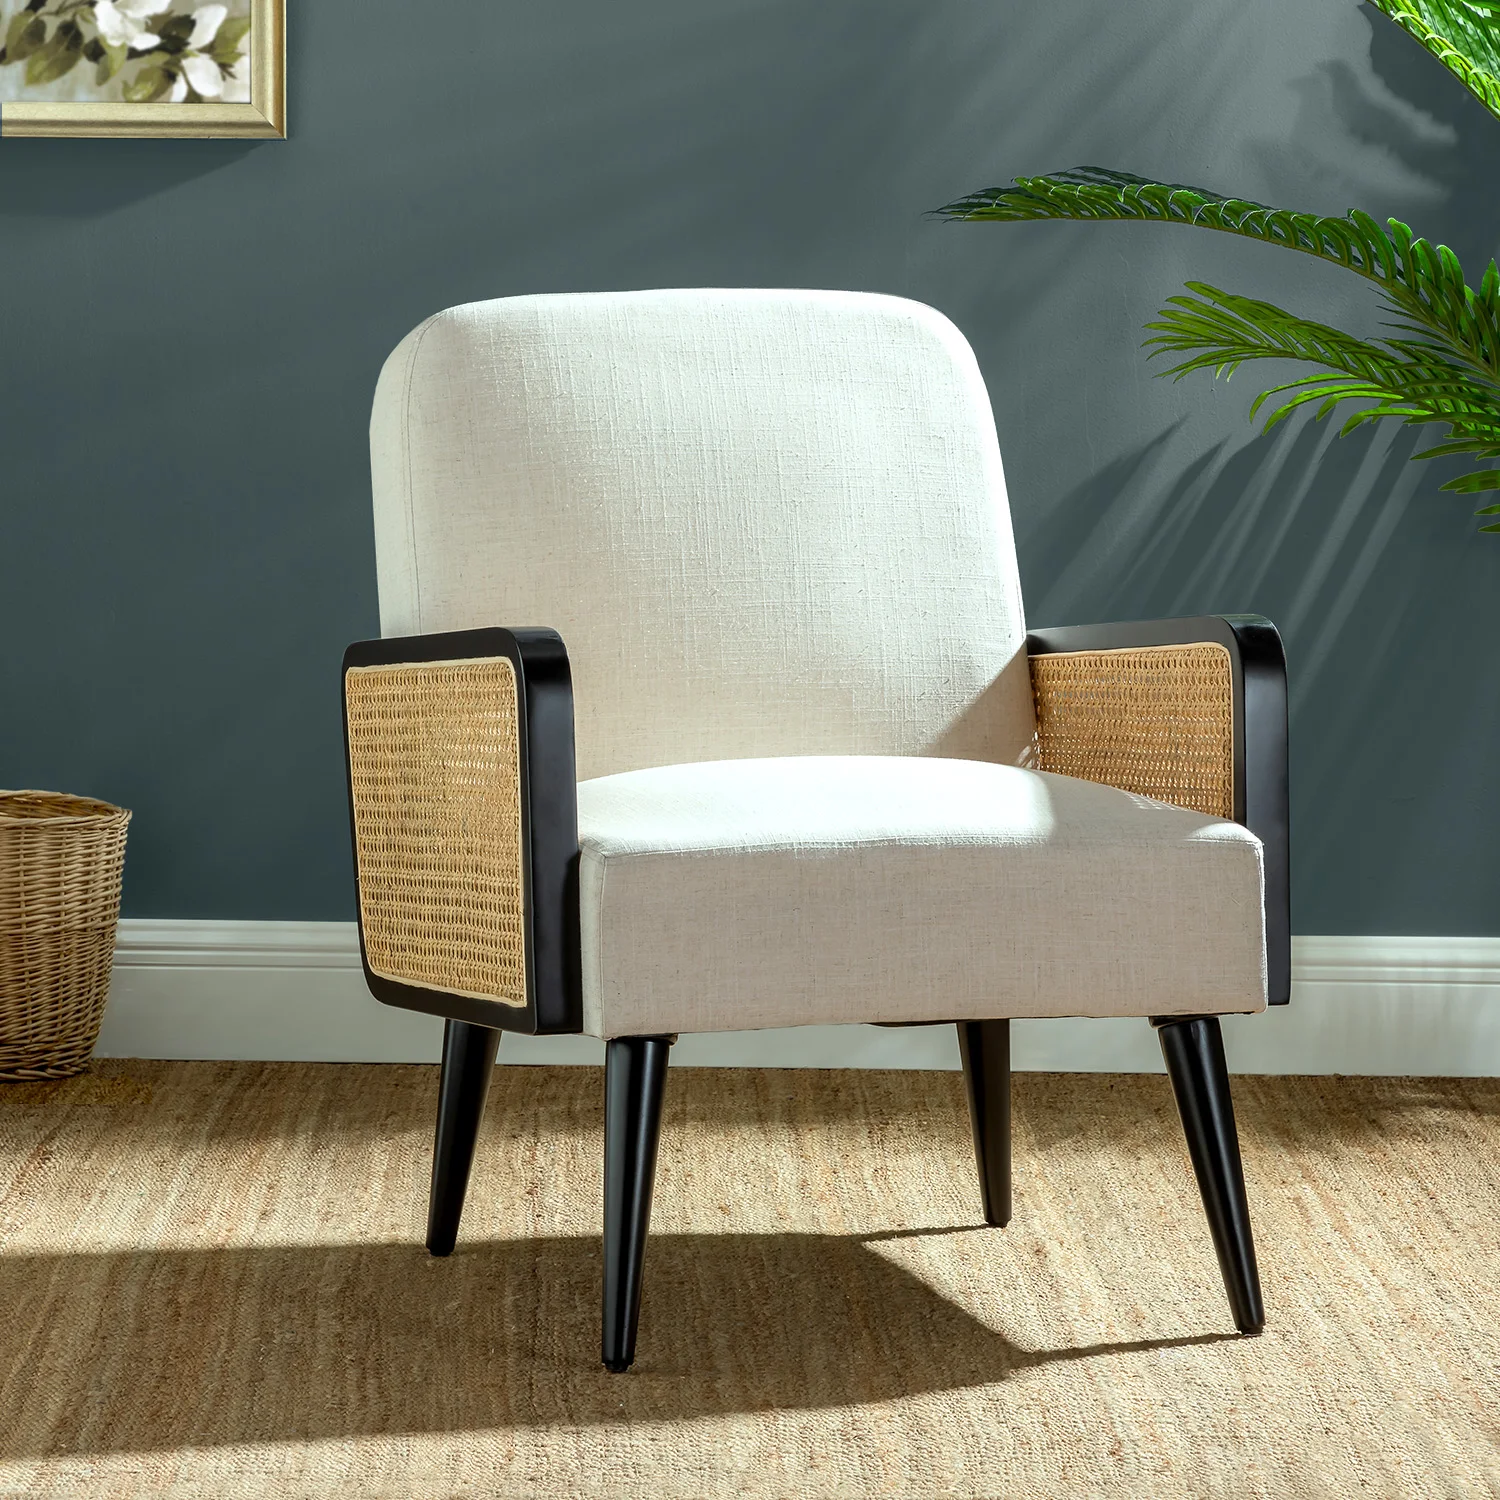 

Mid Century Modern Accent Chair, Upholstered Chairs with Bamboo Knitting and Solid Wood Legs, Comfy Linen Fabric Armchair